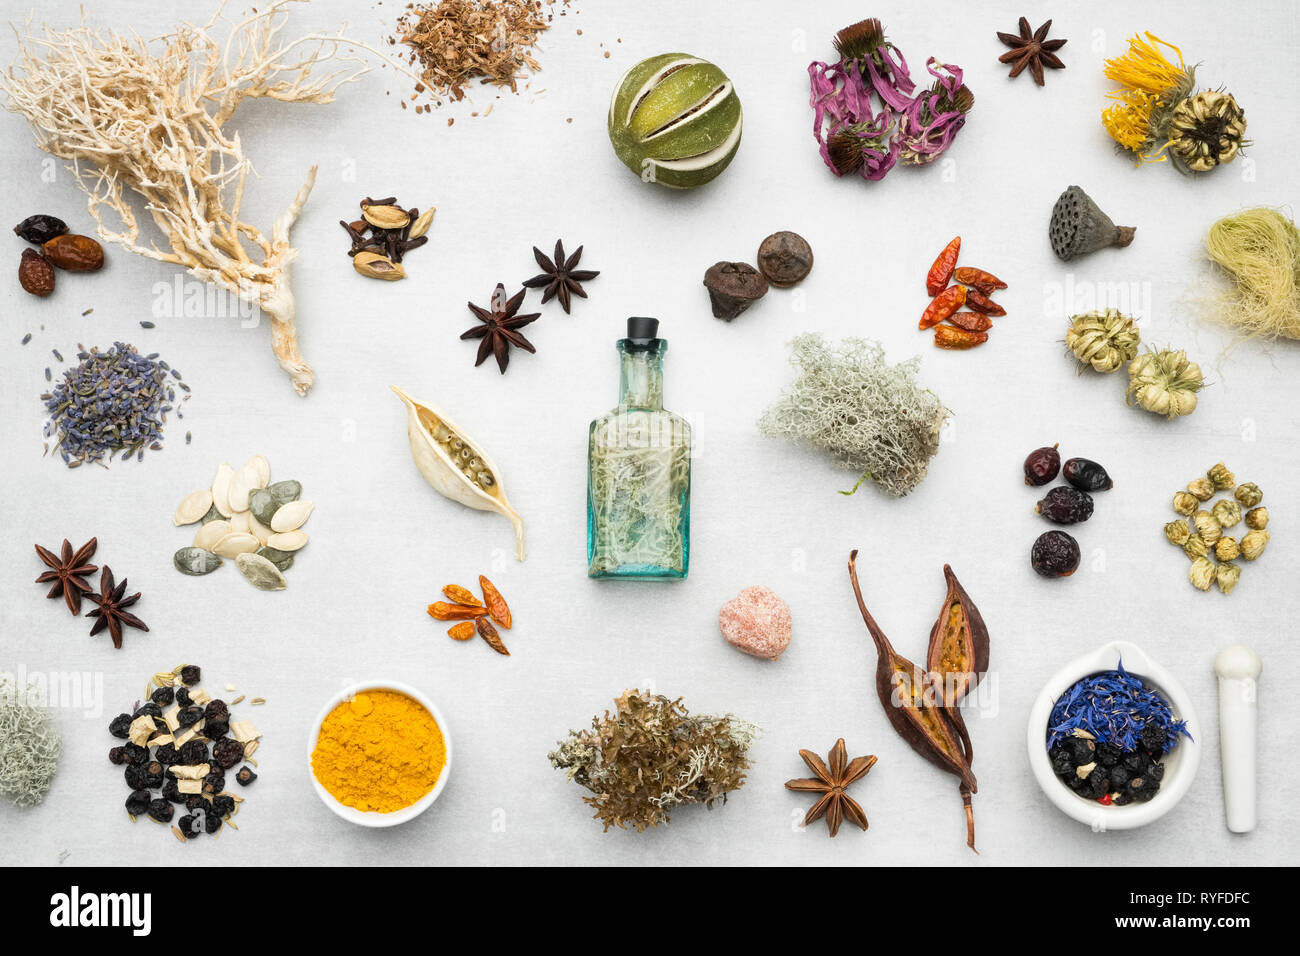 Background from dry medicinal herbs, plants, roots, ingredients for making herbal medicine remedies. Top view. Stock Photo